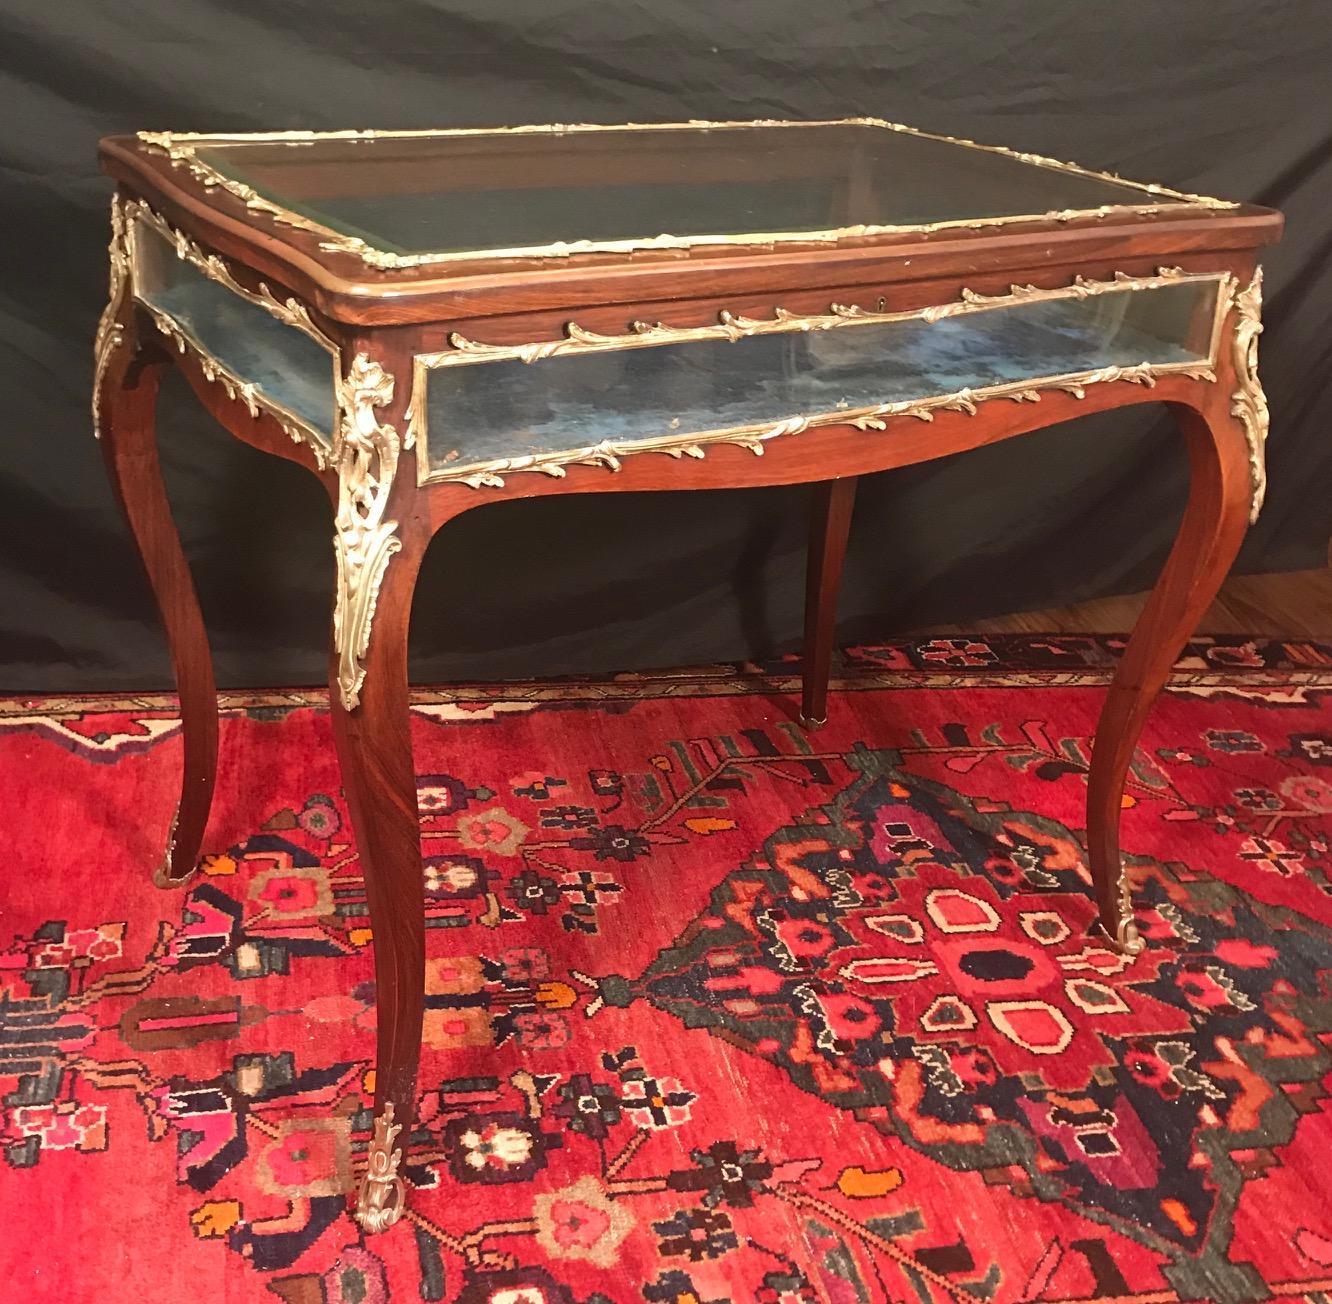 19th century Louis XV style curio display table, mahogany with bronze mounts

French Louis XV style elegant mahogany and bronze decorated display vitrine table. The table has four sided, curved and bent glass panels, which are trimmed with the